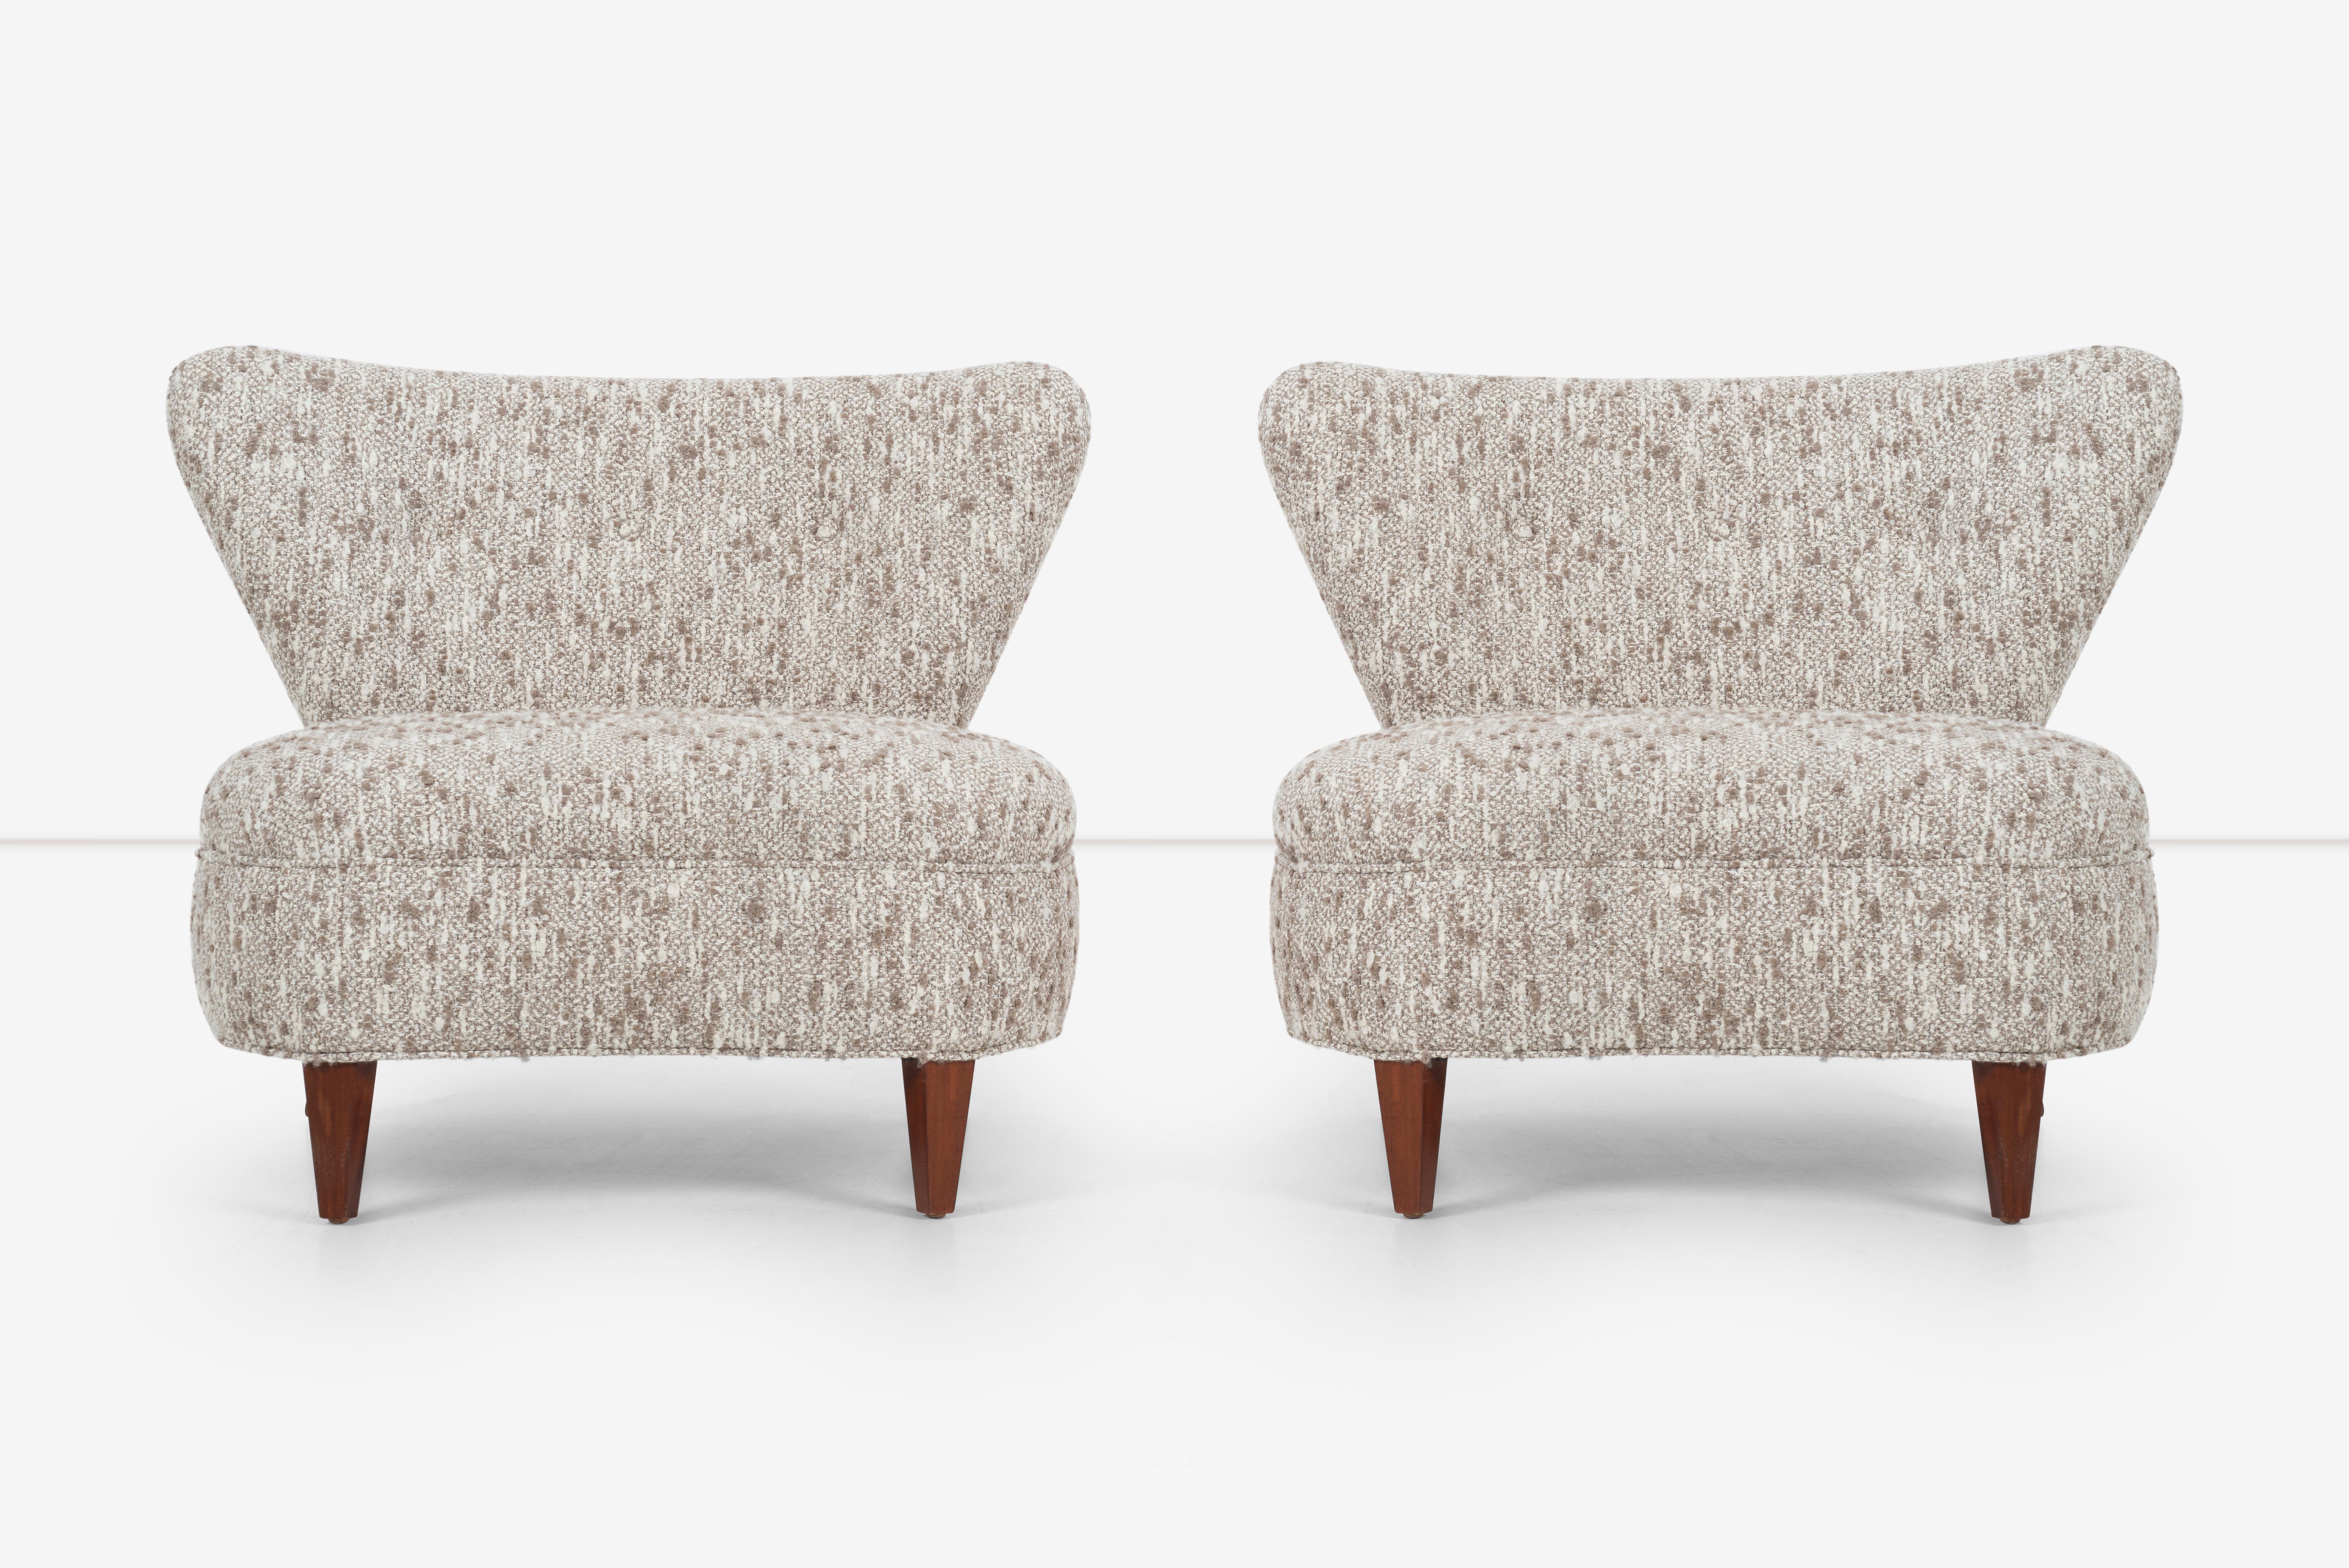 This pair of winged slipper chairs are a sophisticated and stylish addition to any home. The chairs' winged design provides a comfortable and supportive seat, while the boucle upholstery adds a touch of luxury and texture to the design. The walnut